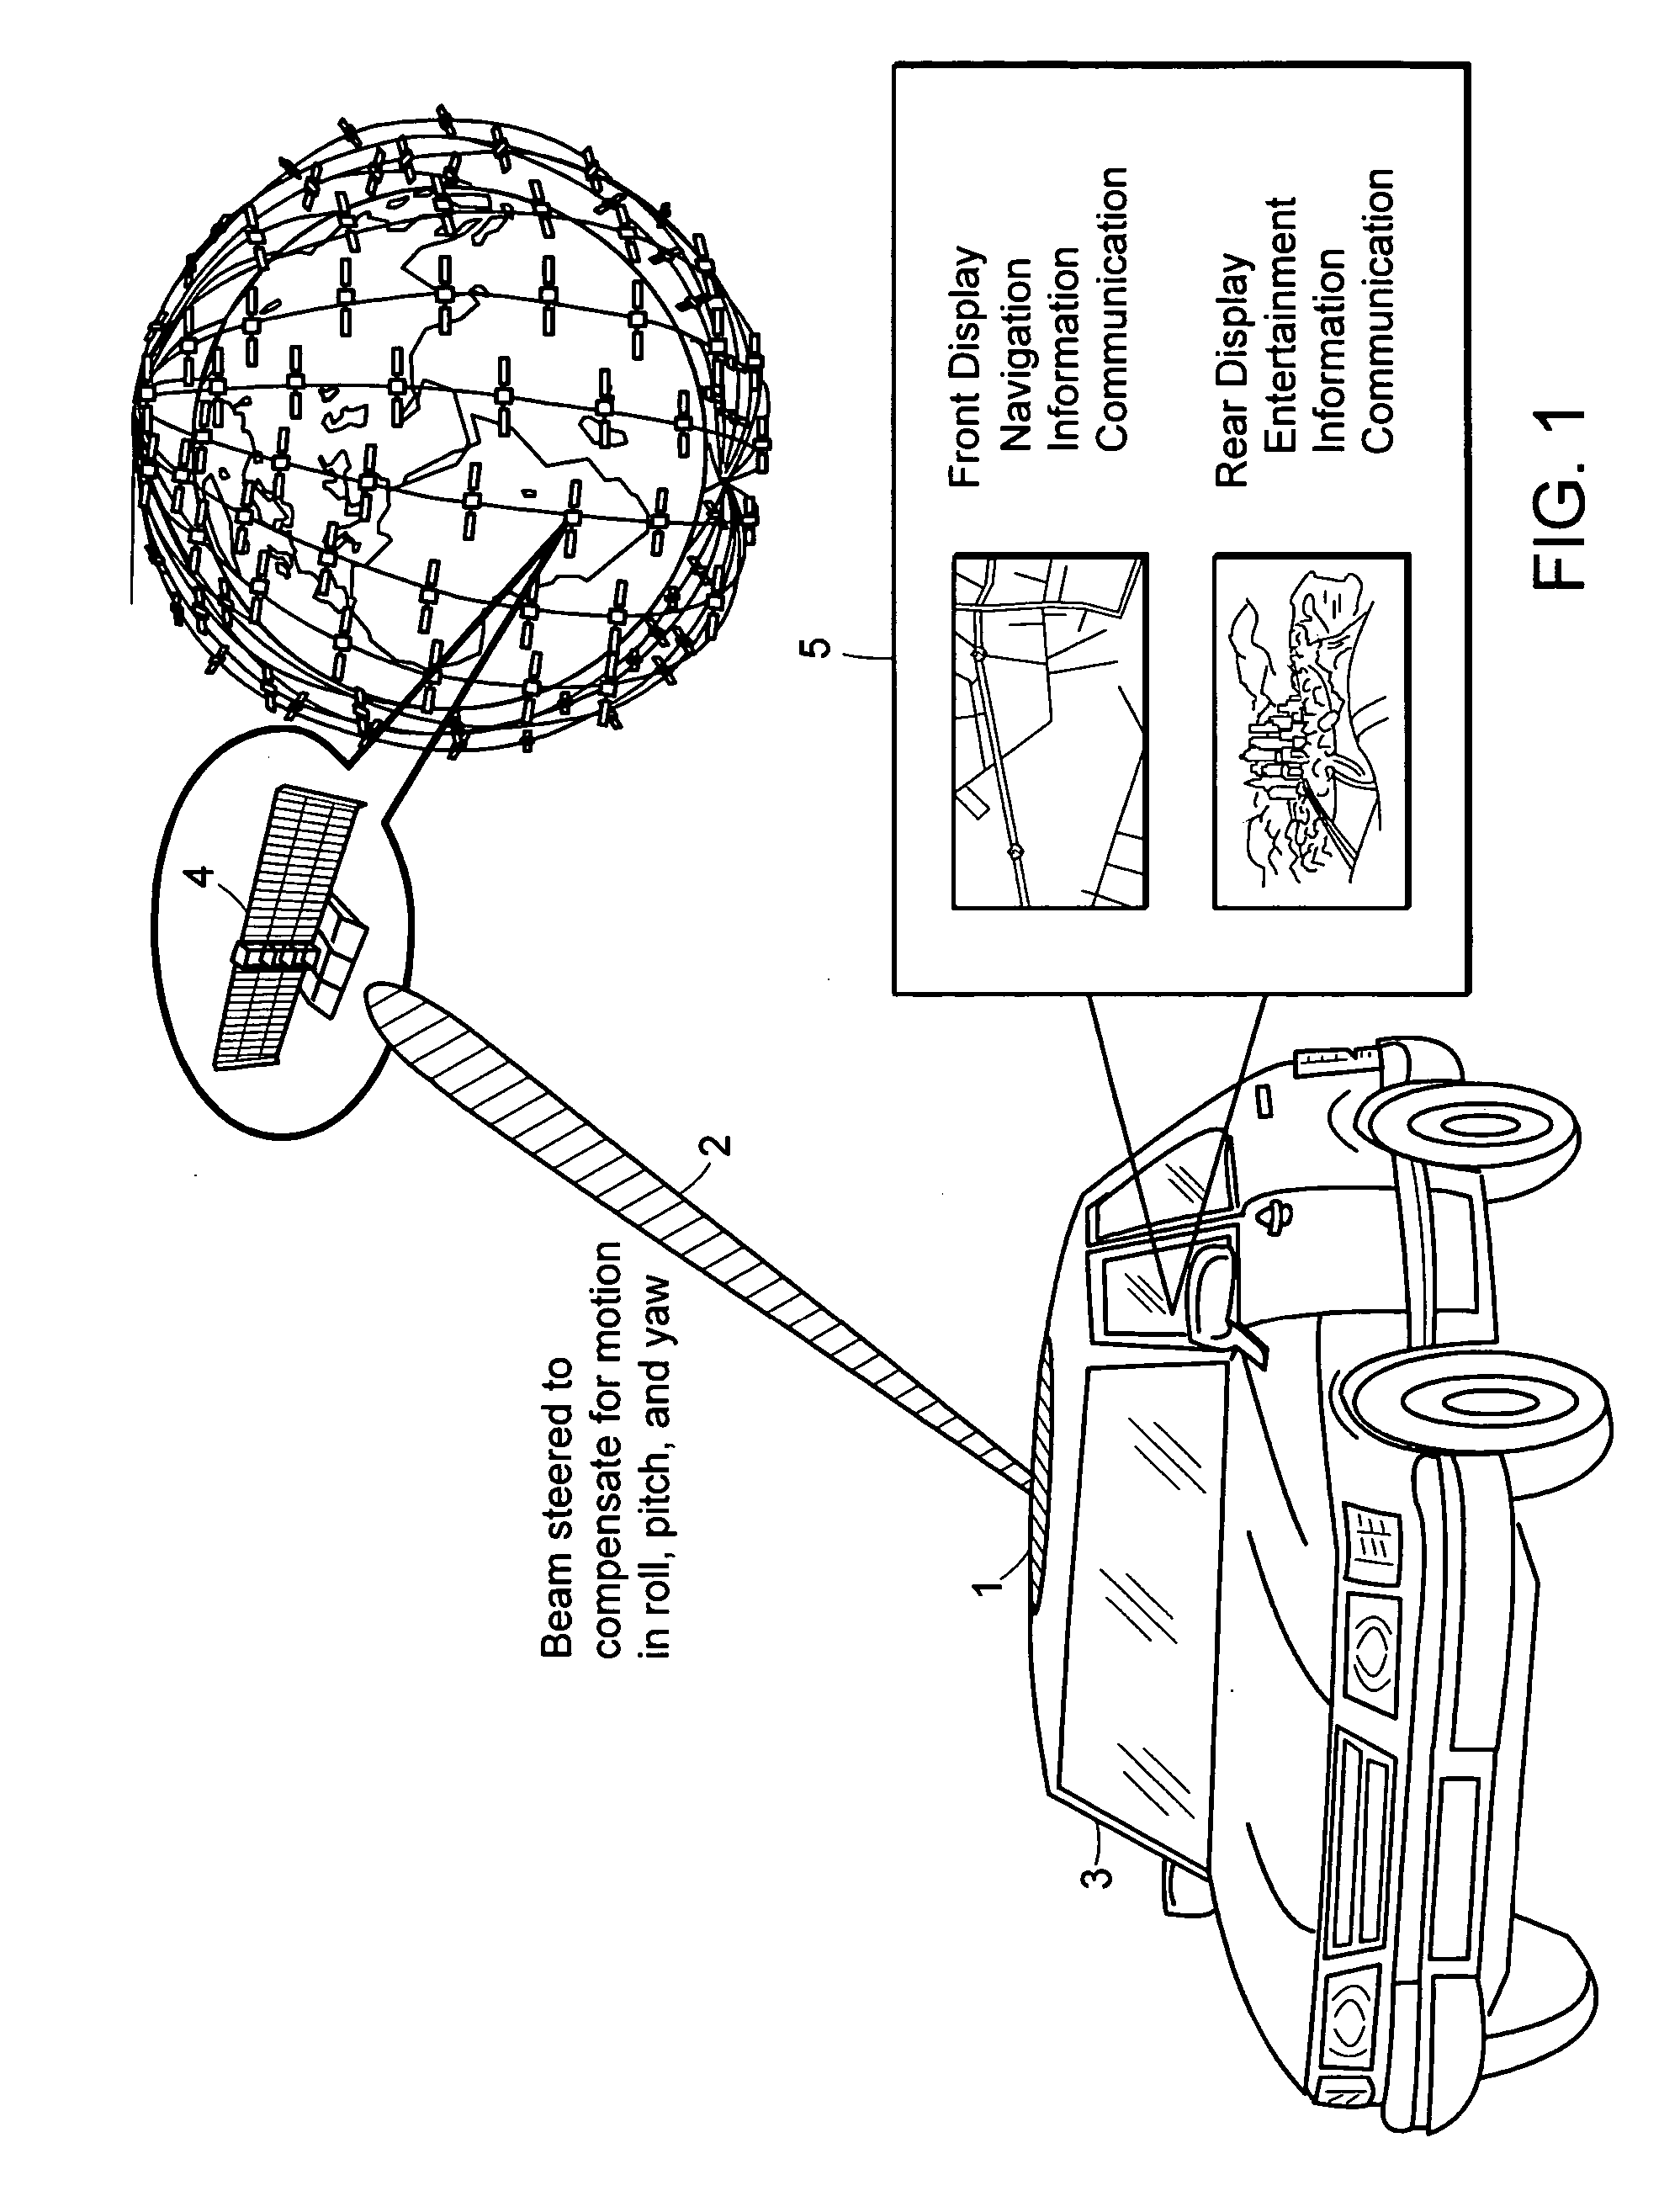 Attitude measurement using a single GPS receiver with two closely-spaced antennas